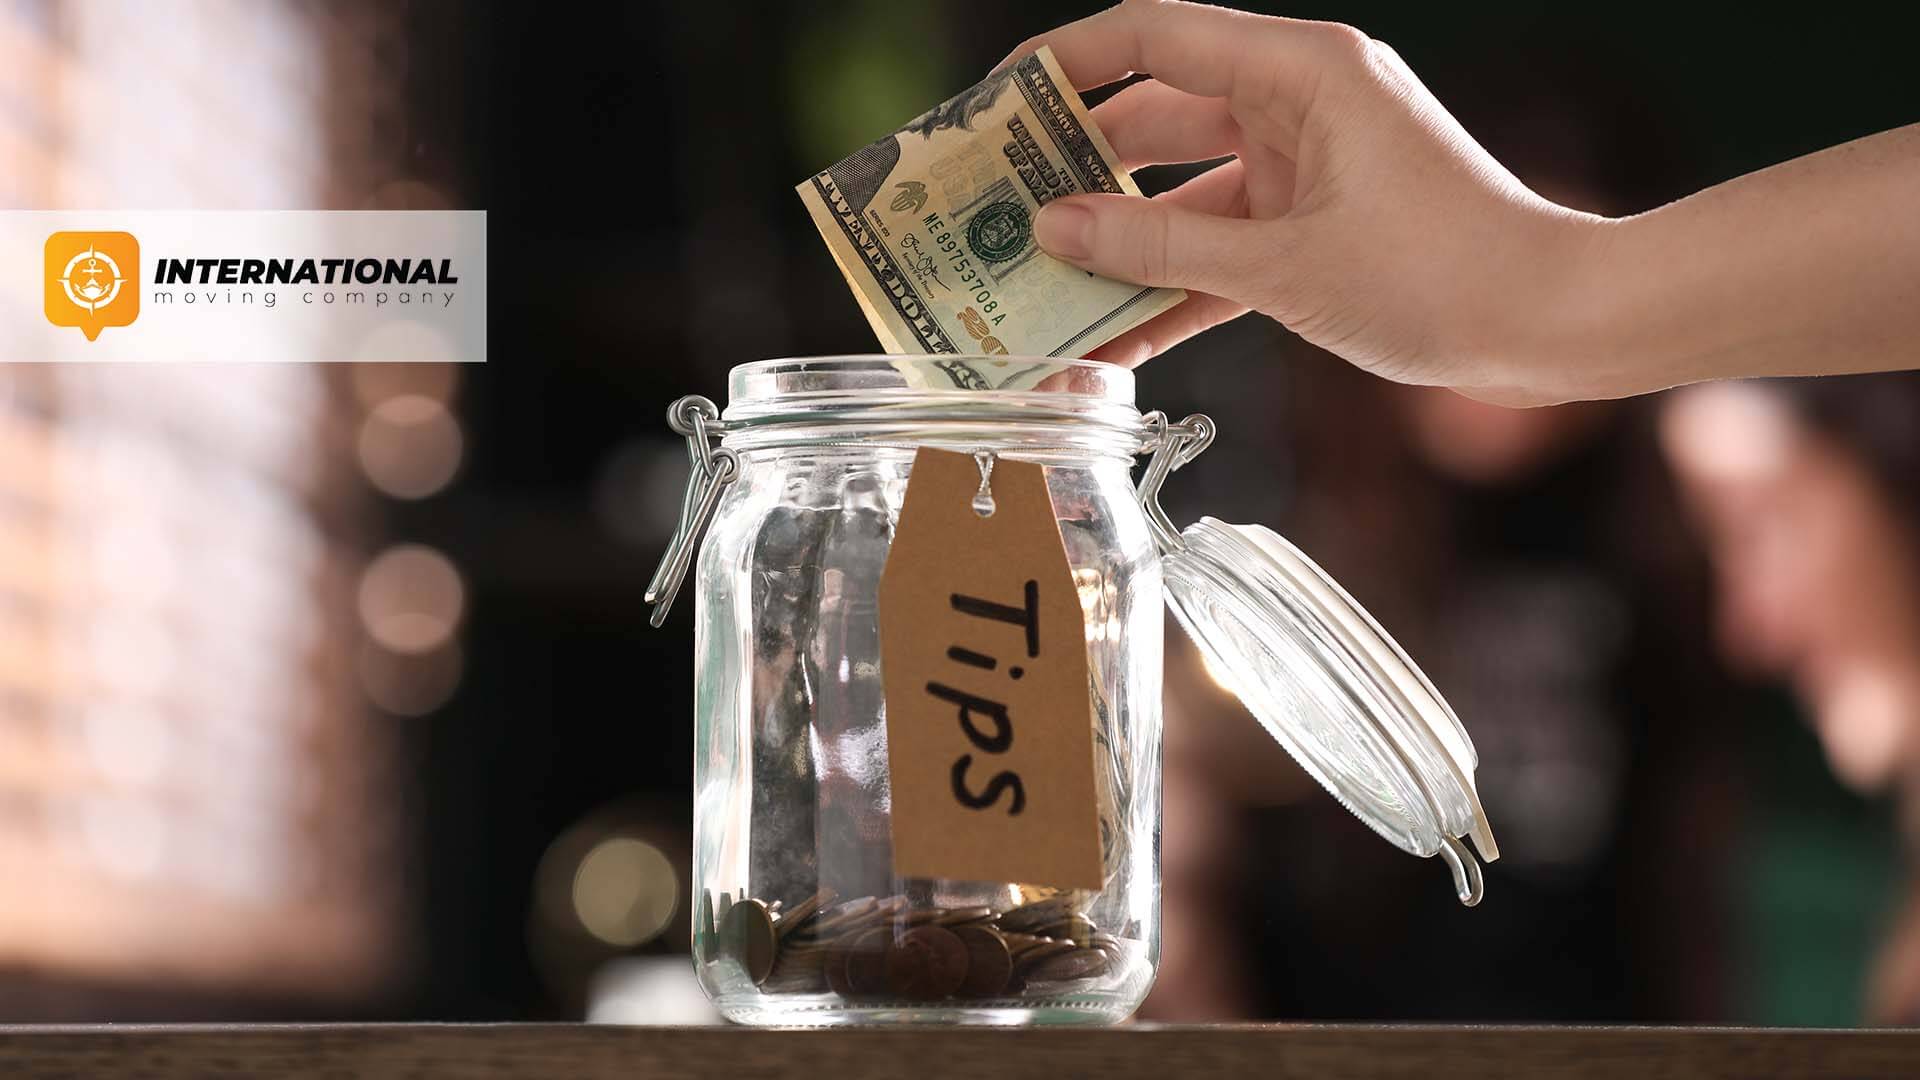 Person putting money in a jar labeled "tips"